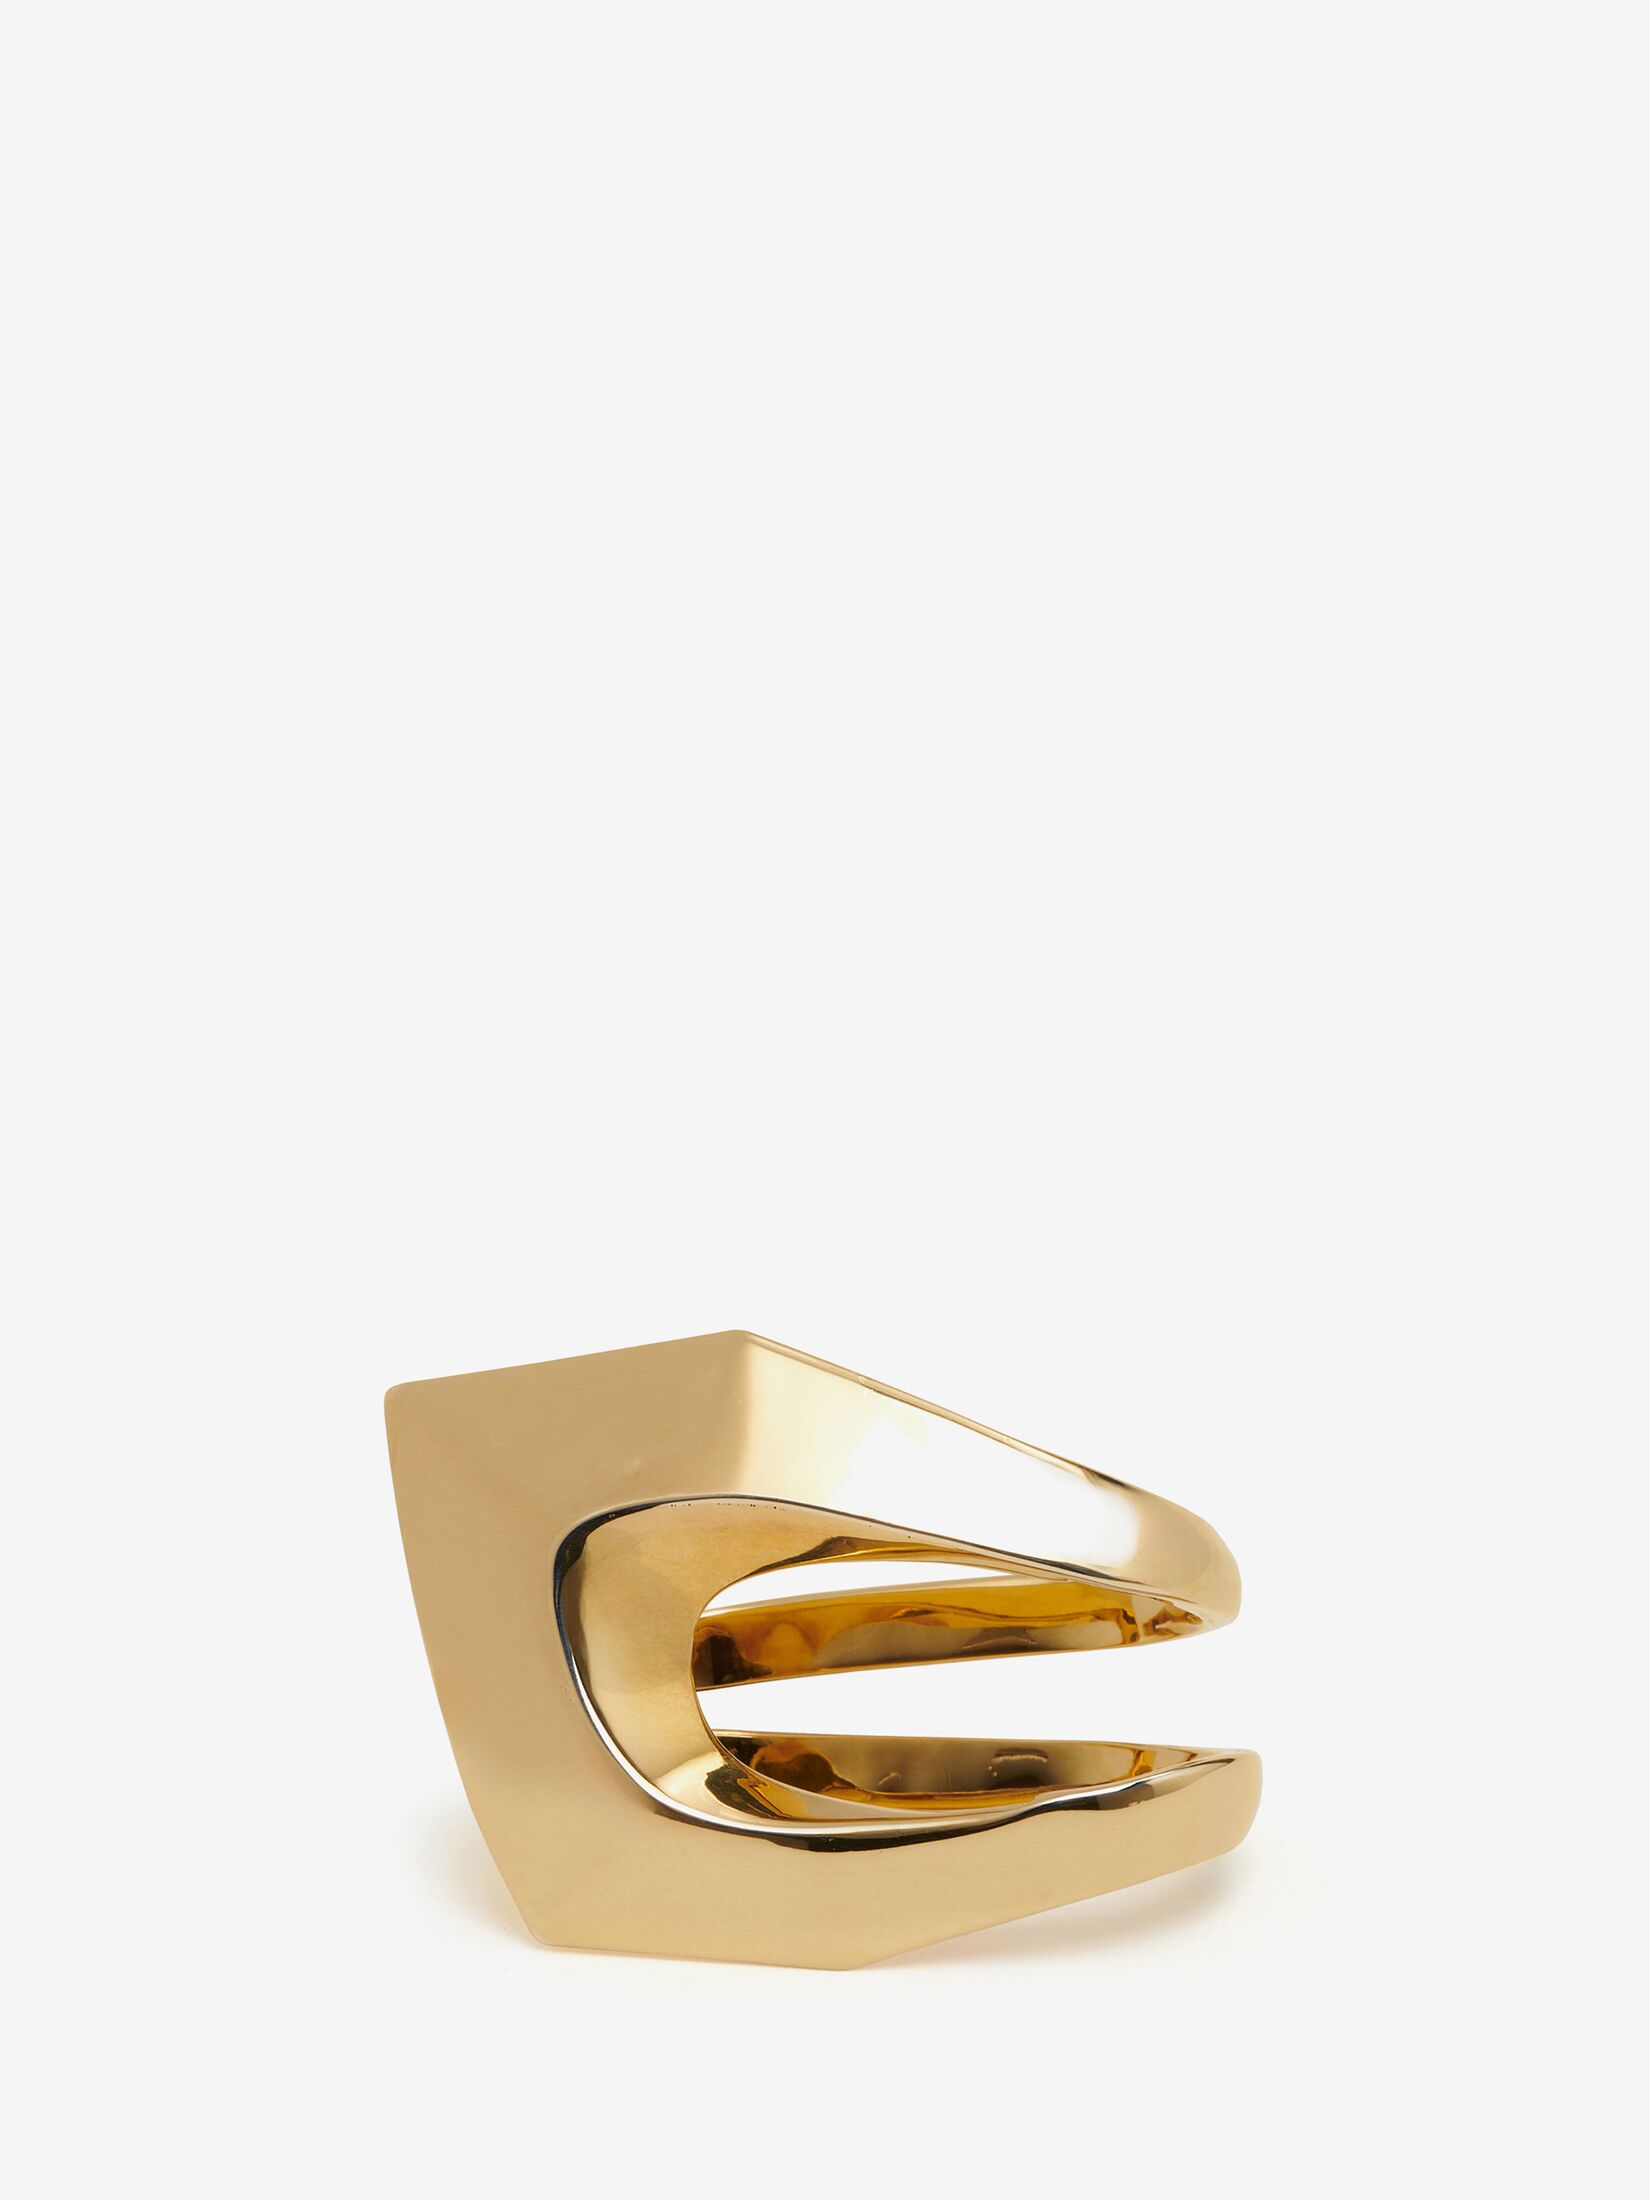 Modernist Double Ring